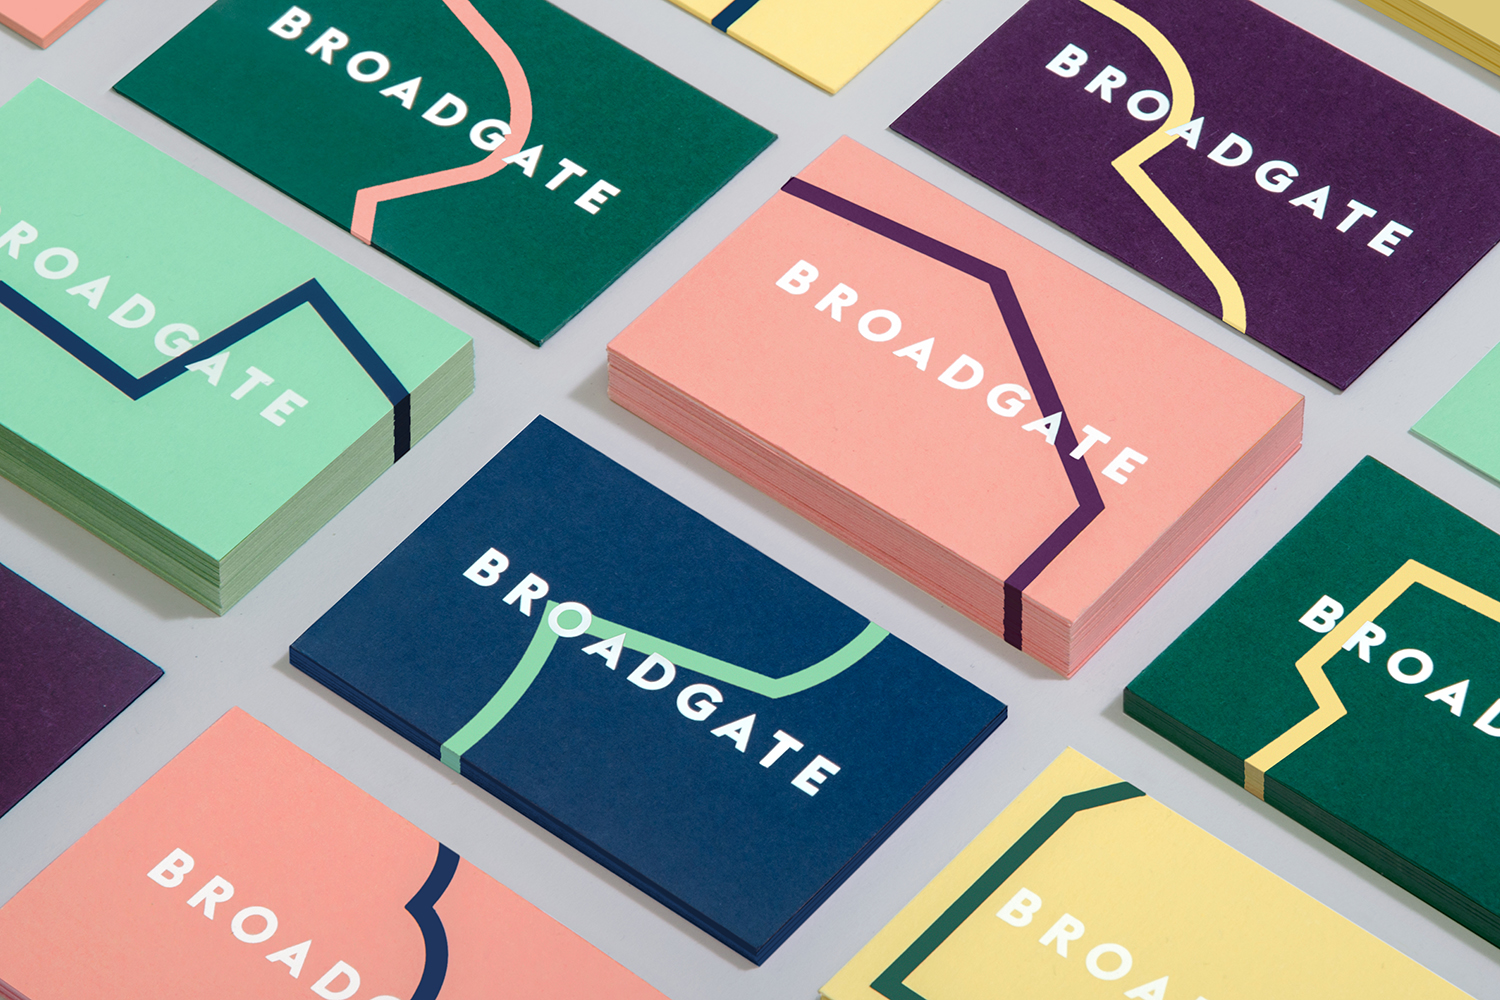 Logo, business cards, posters and tote bags designed by dn&co. for Broadgate, London